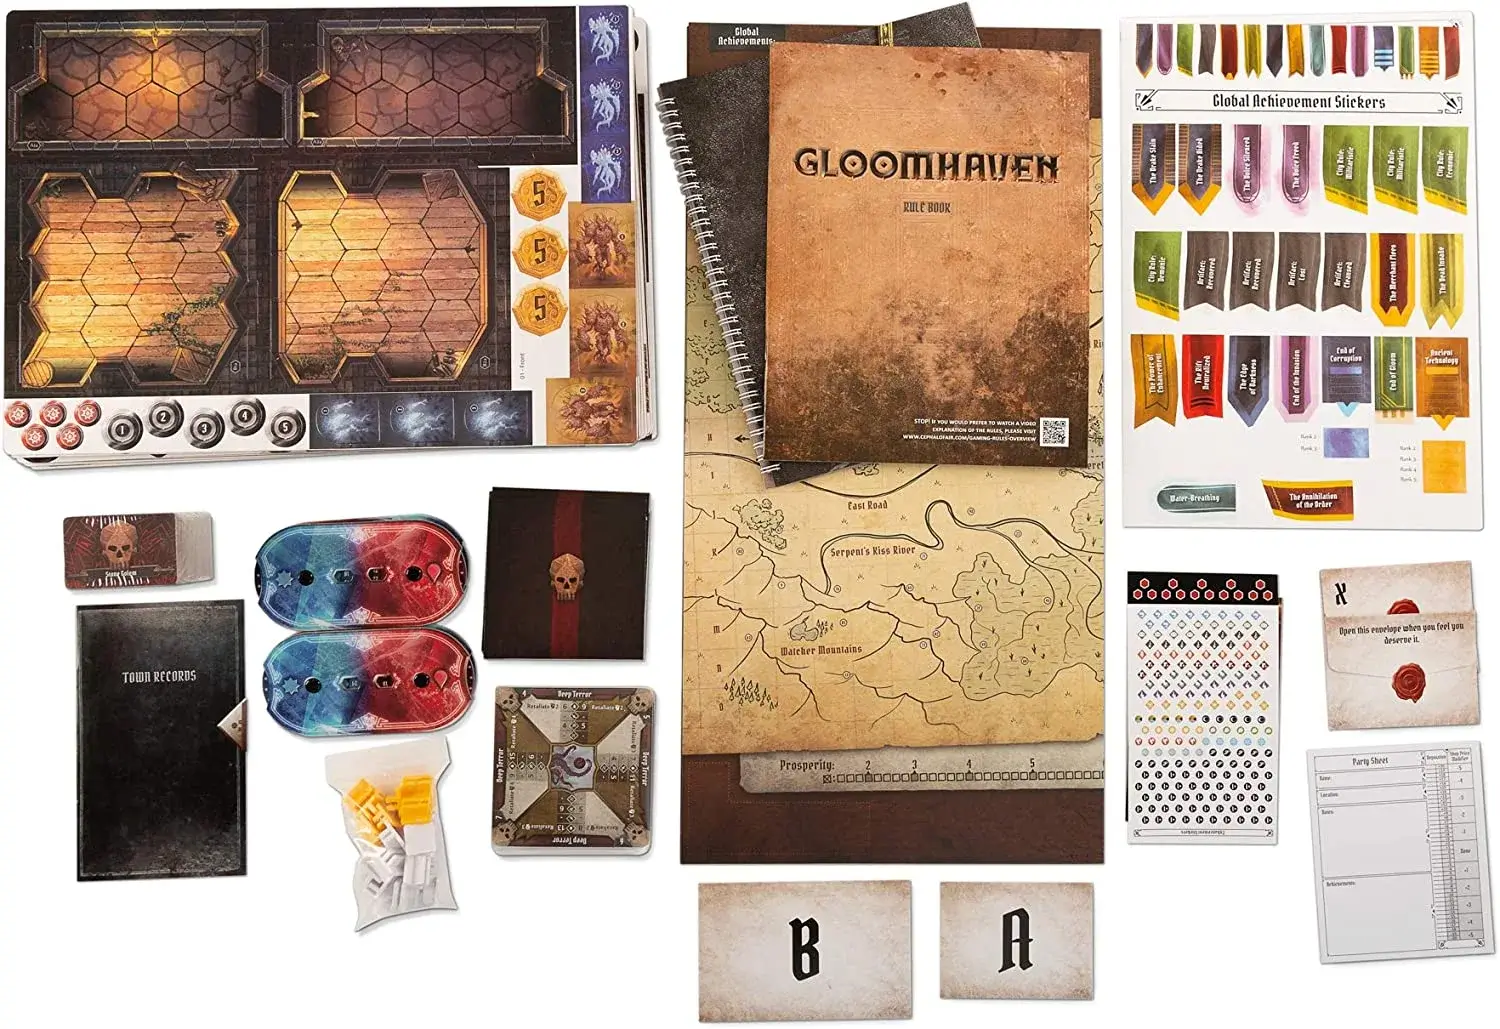 Gloomhaven board game components